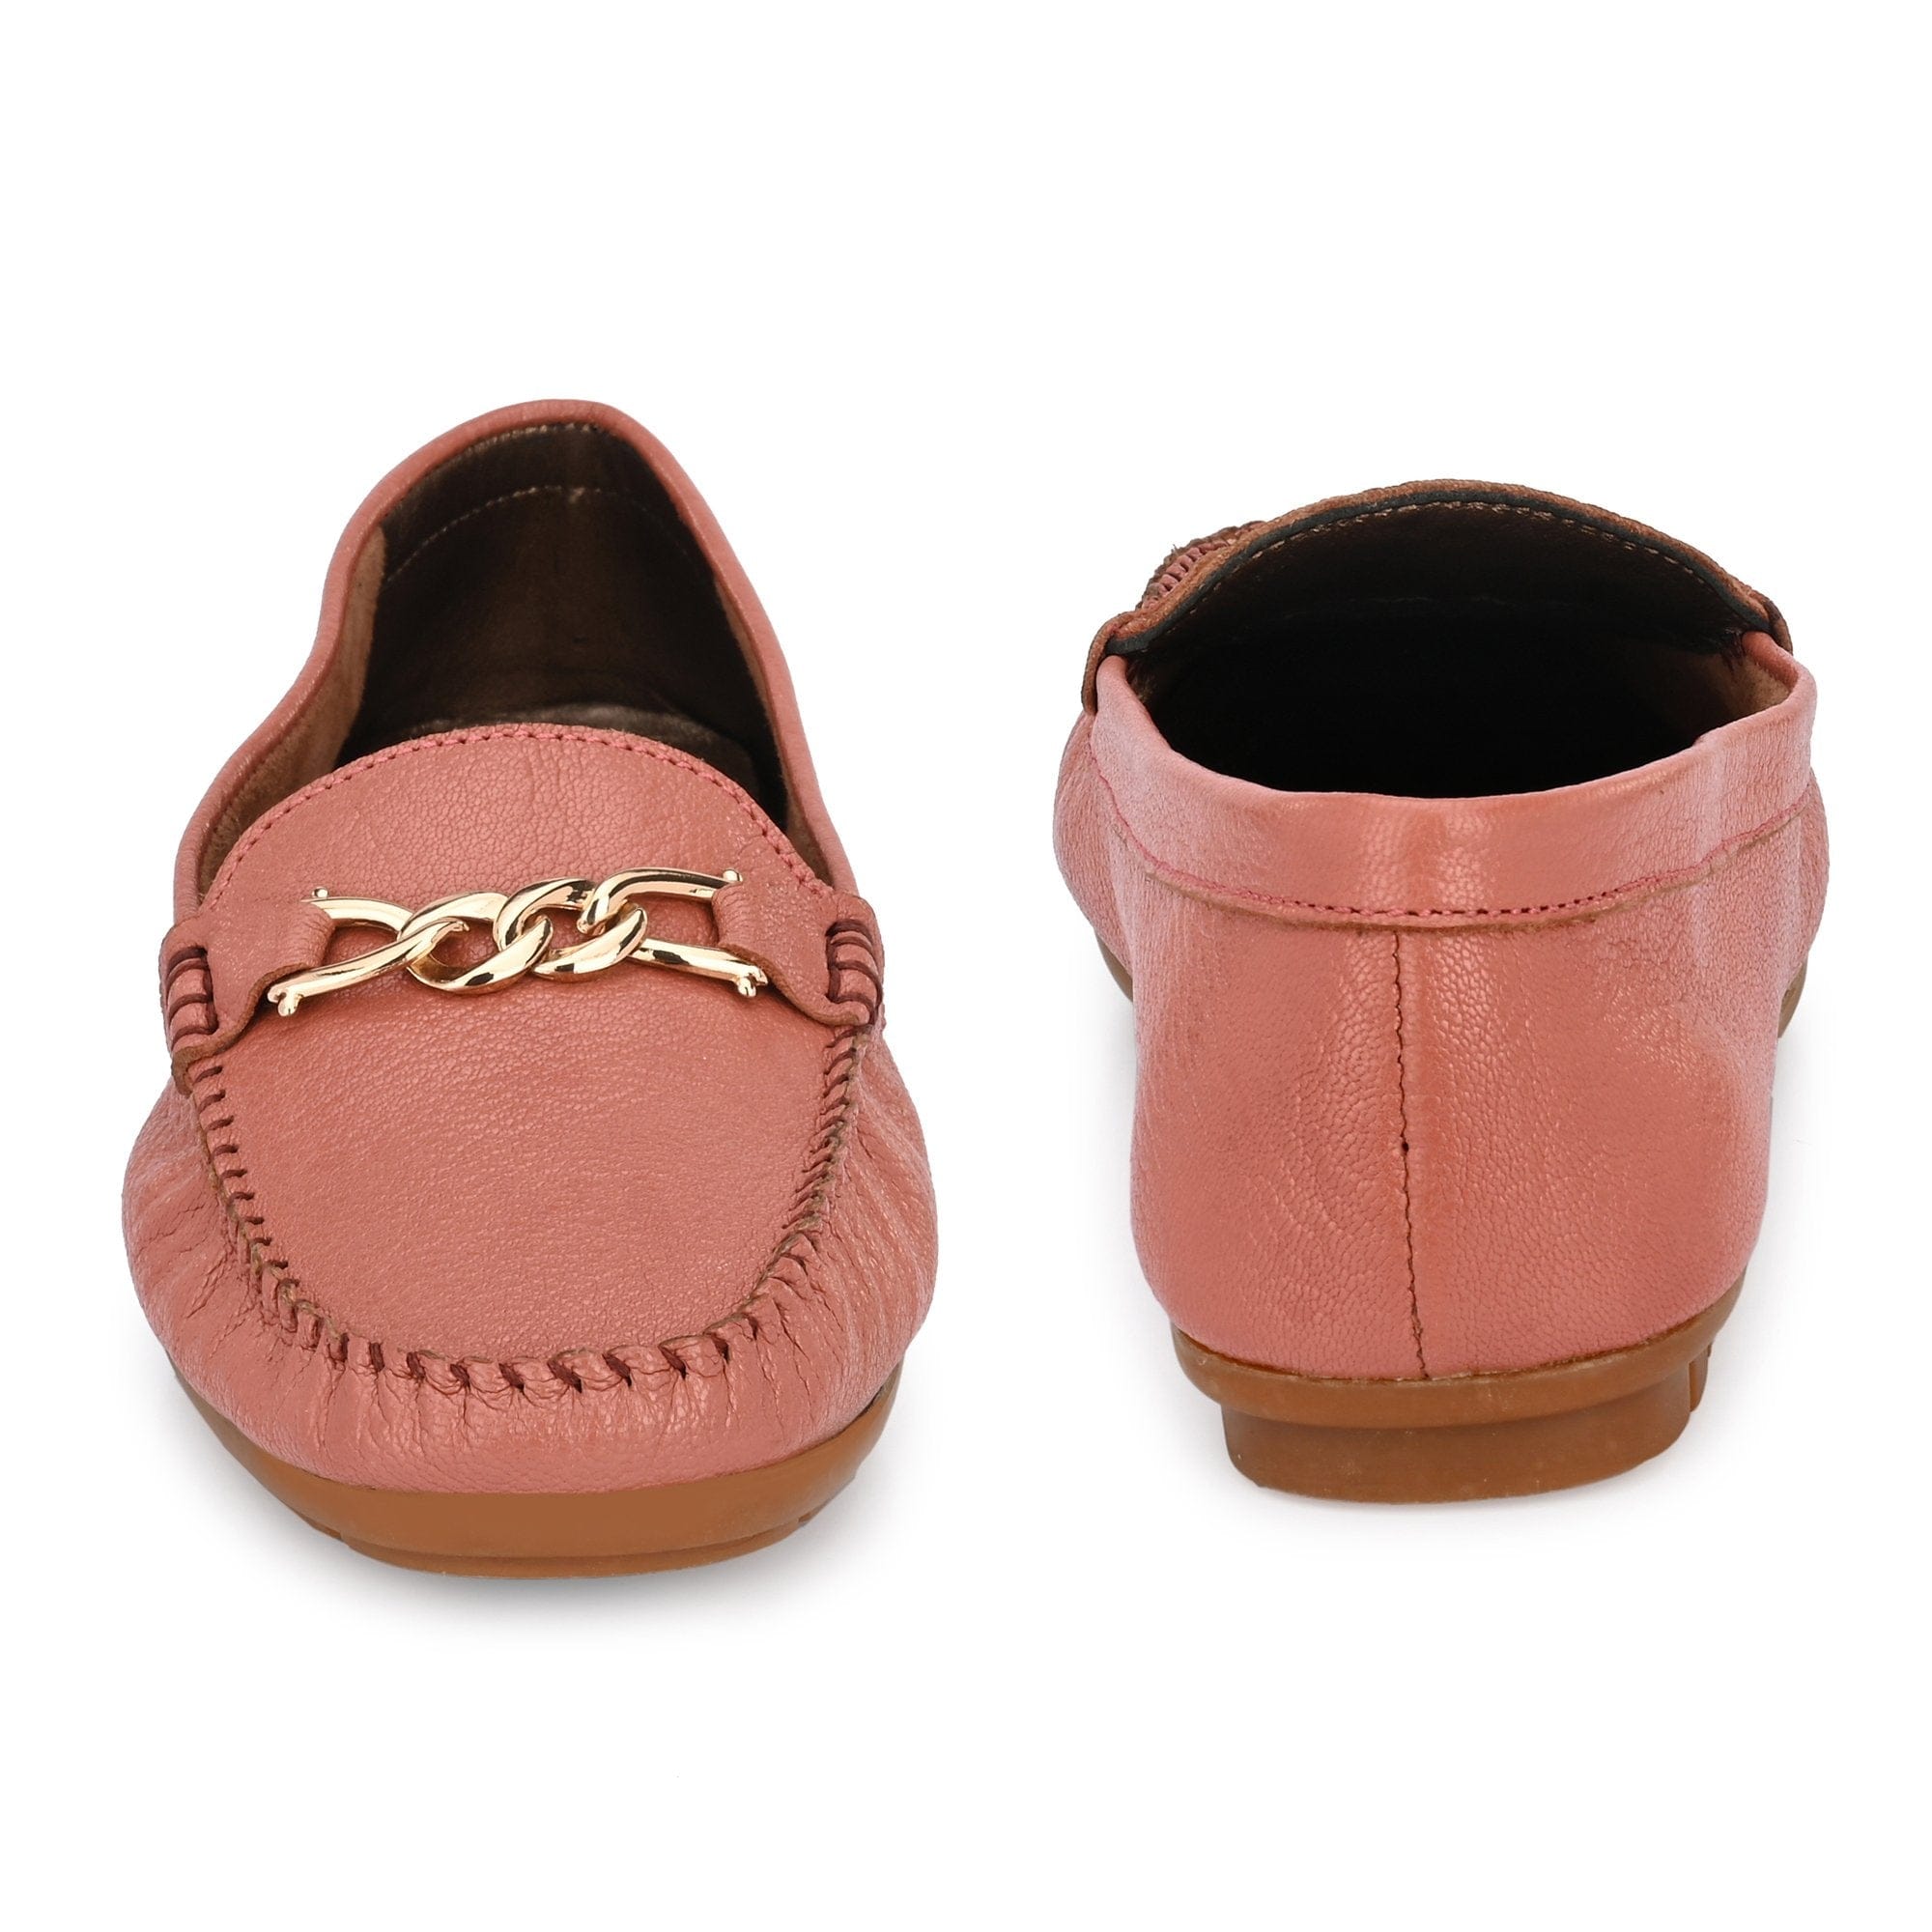 Golden Chain Buckled Loafers For Women egoss-shoes